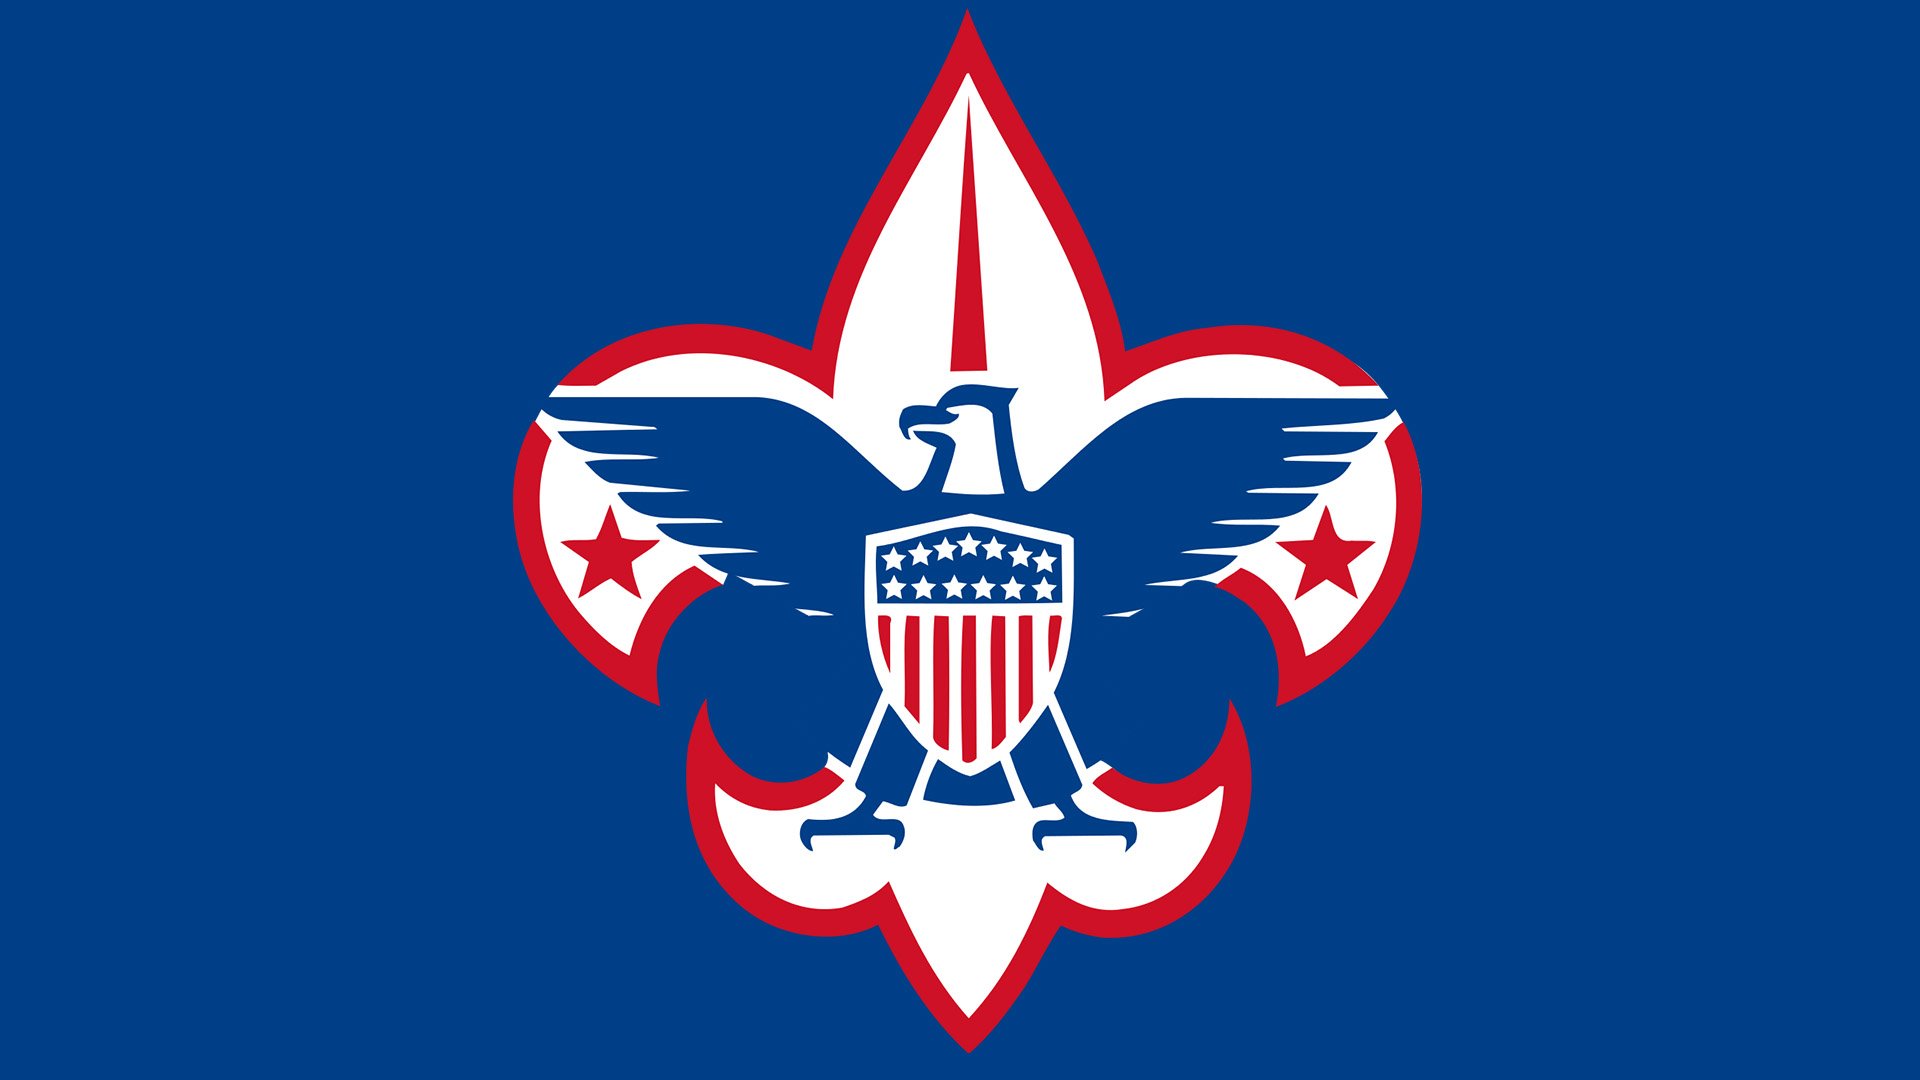 Free: Eagle Scout Boy Scouts Of America Logo - nohat.cc